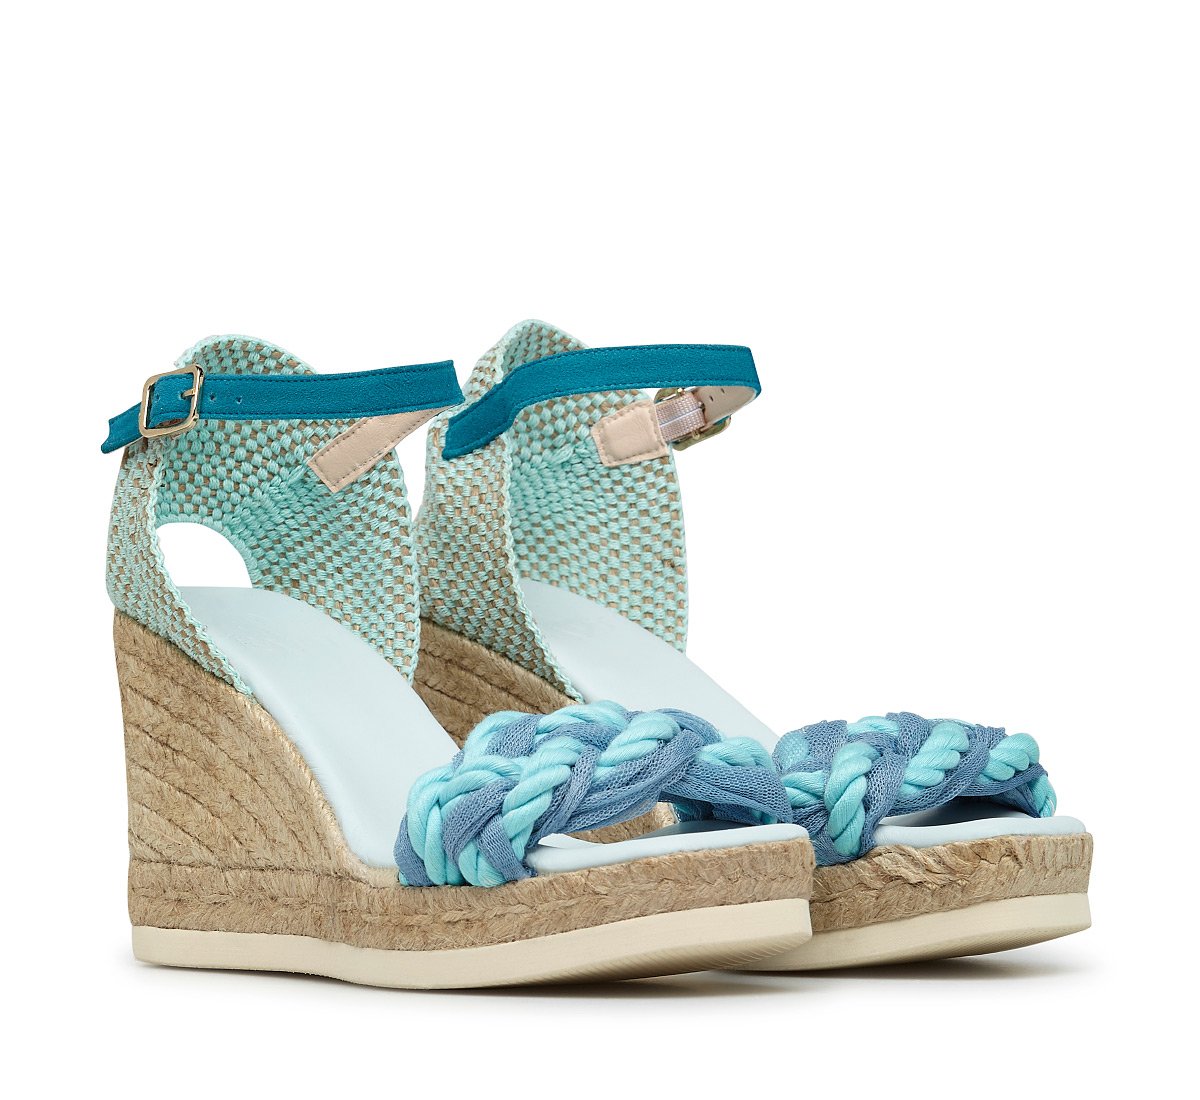 Espadrilles with wedge and ankle strap